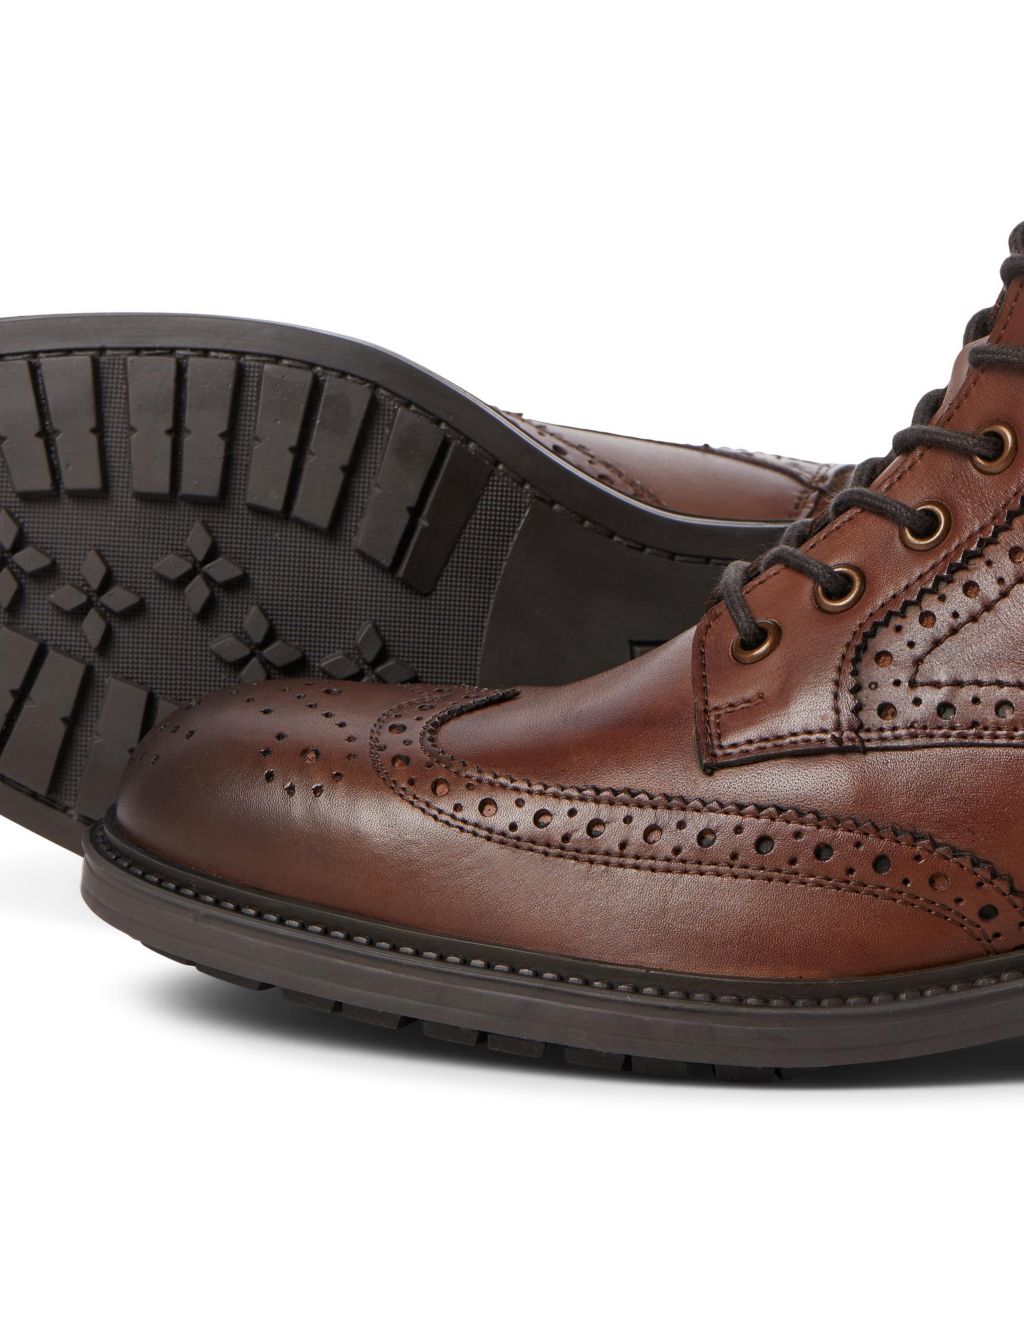 Leather Brogue Casual Boots image 3